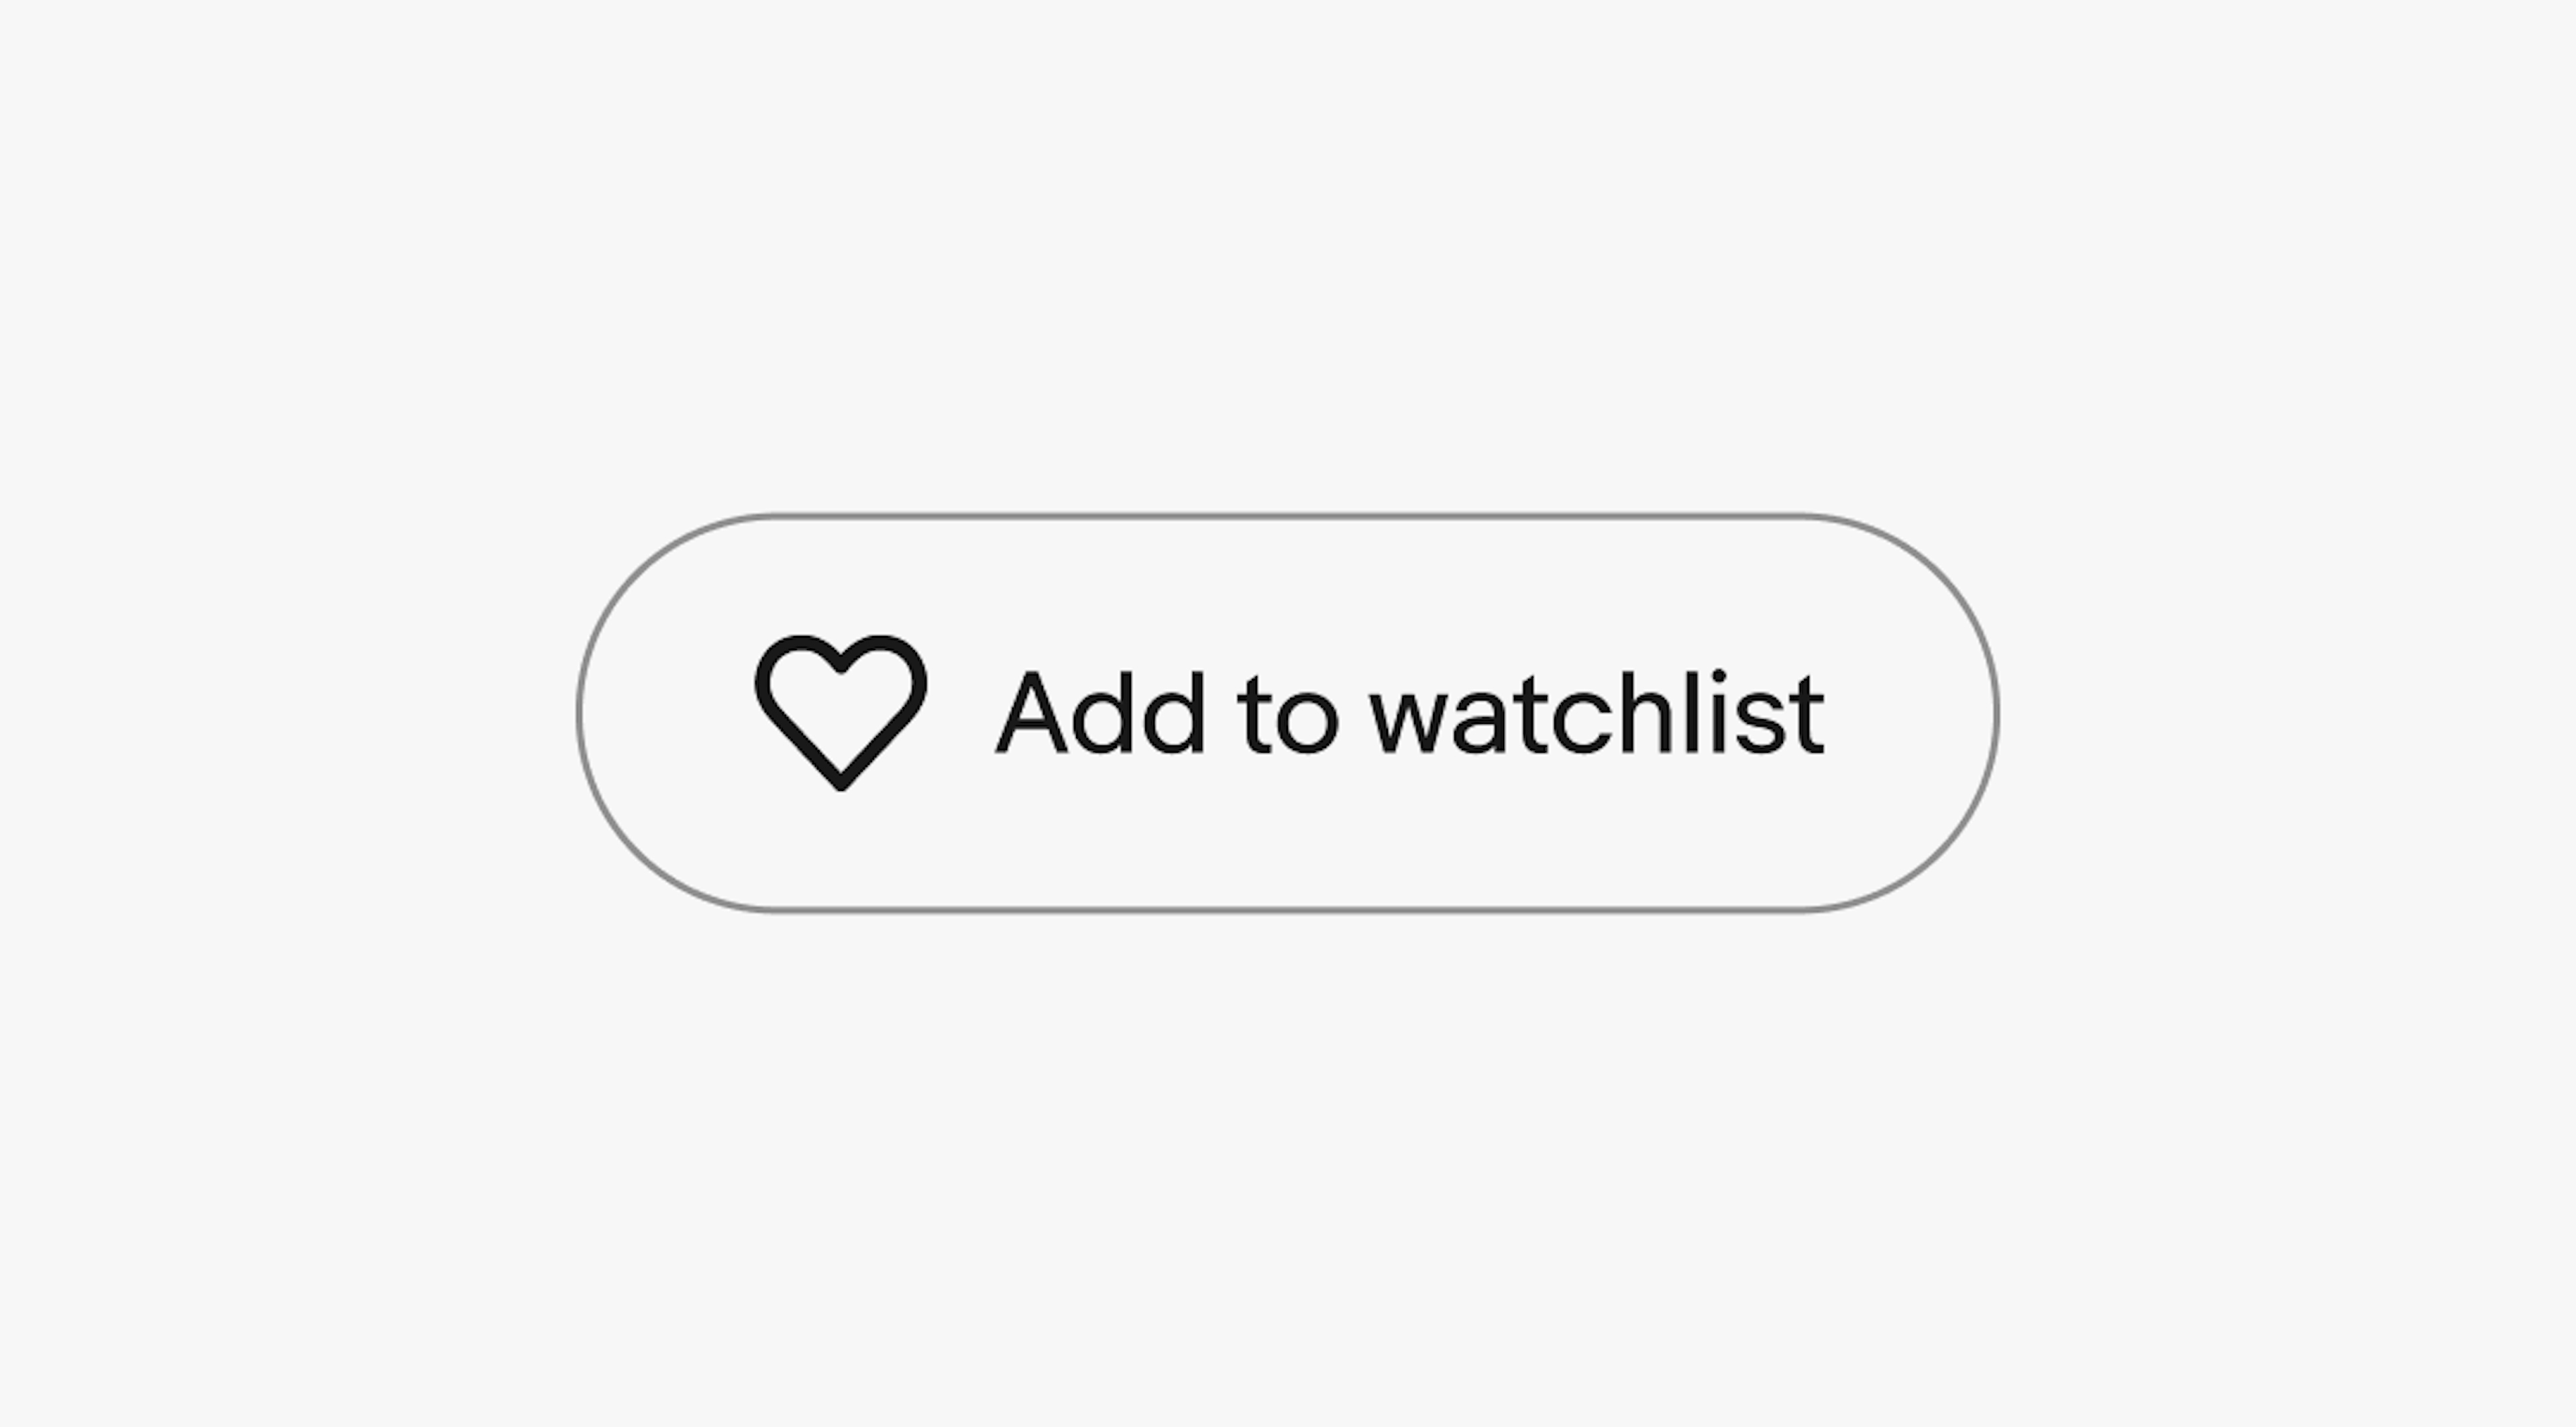 A tertiary icon button with the text “Add to watchlist” in black. The save icon is also black.